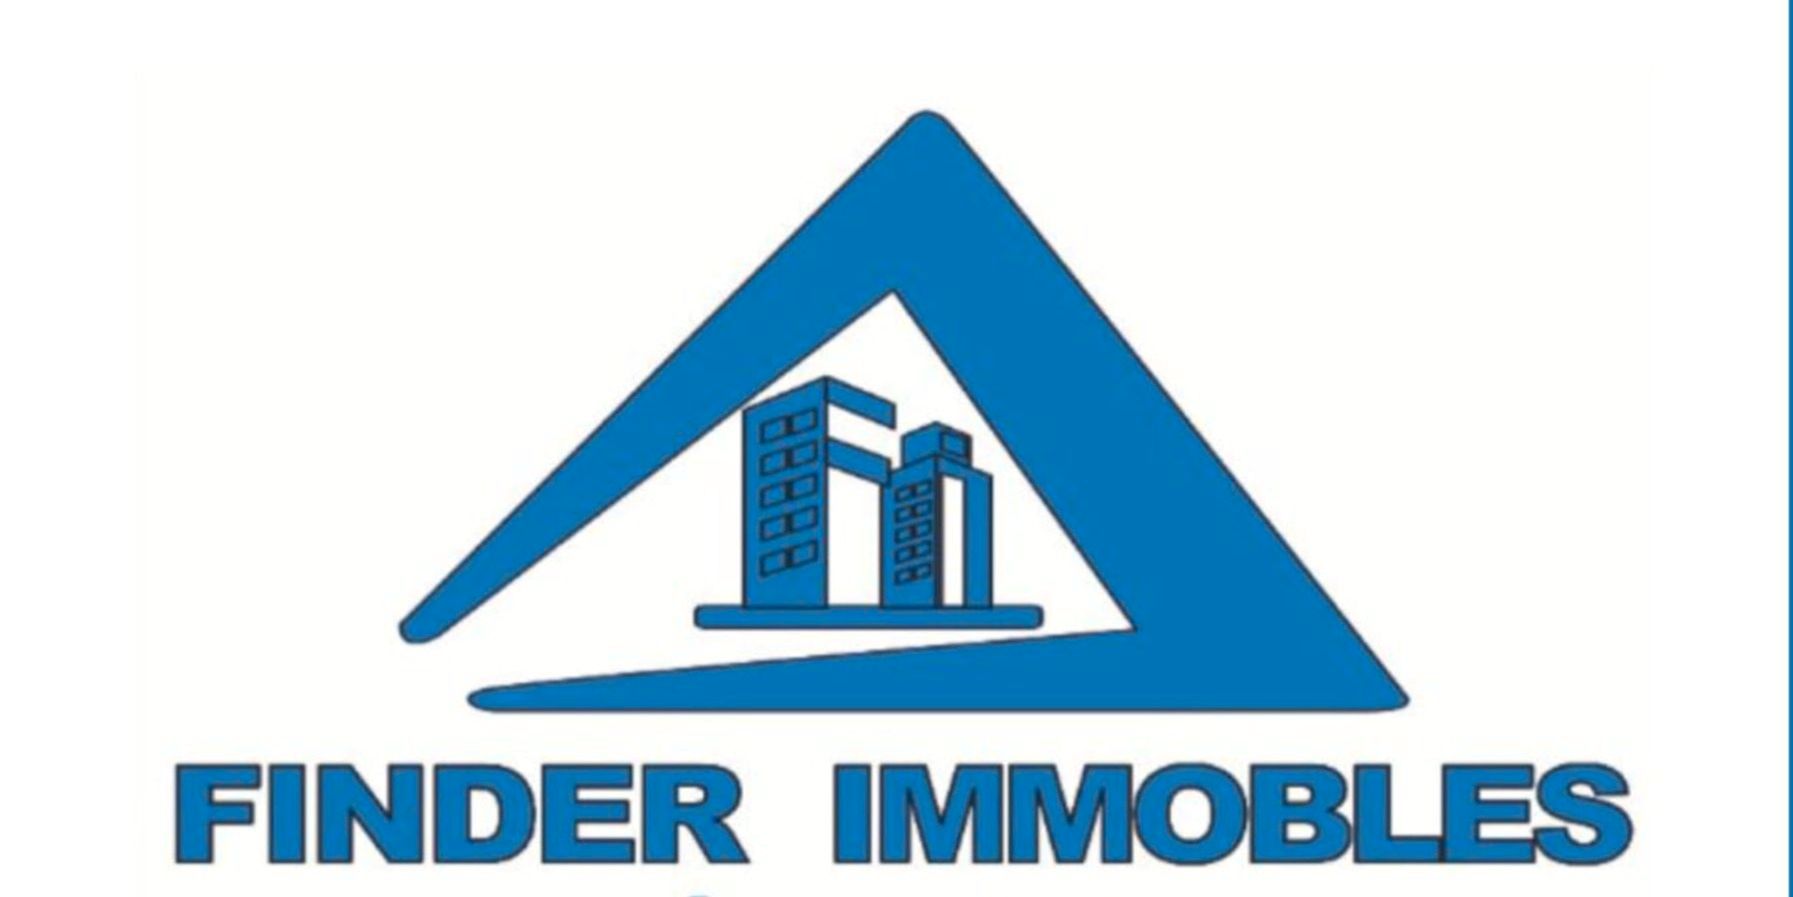 Finder Immobles